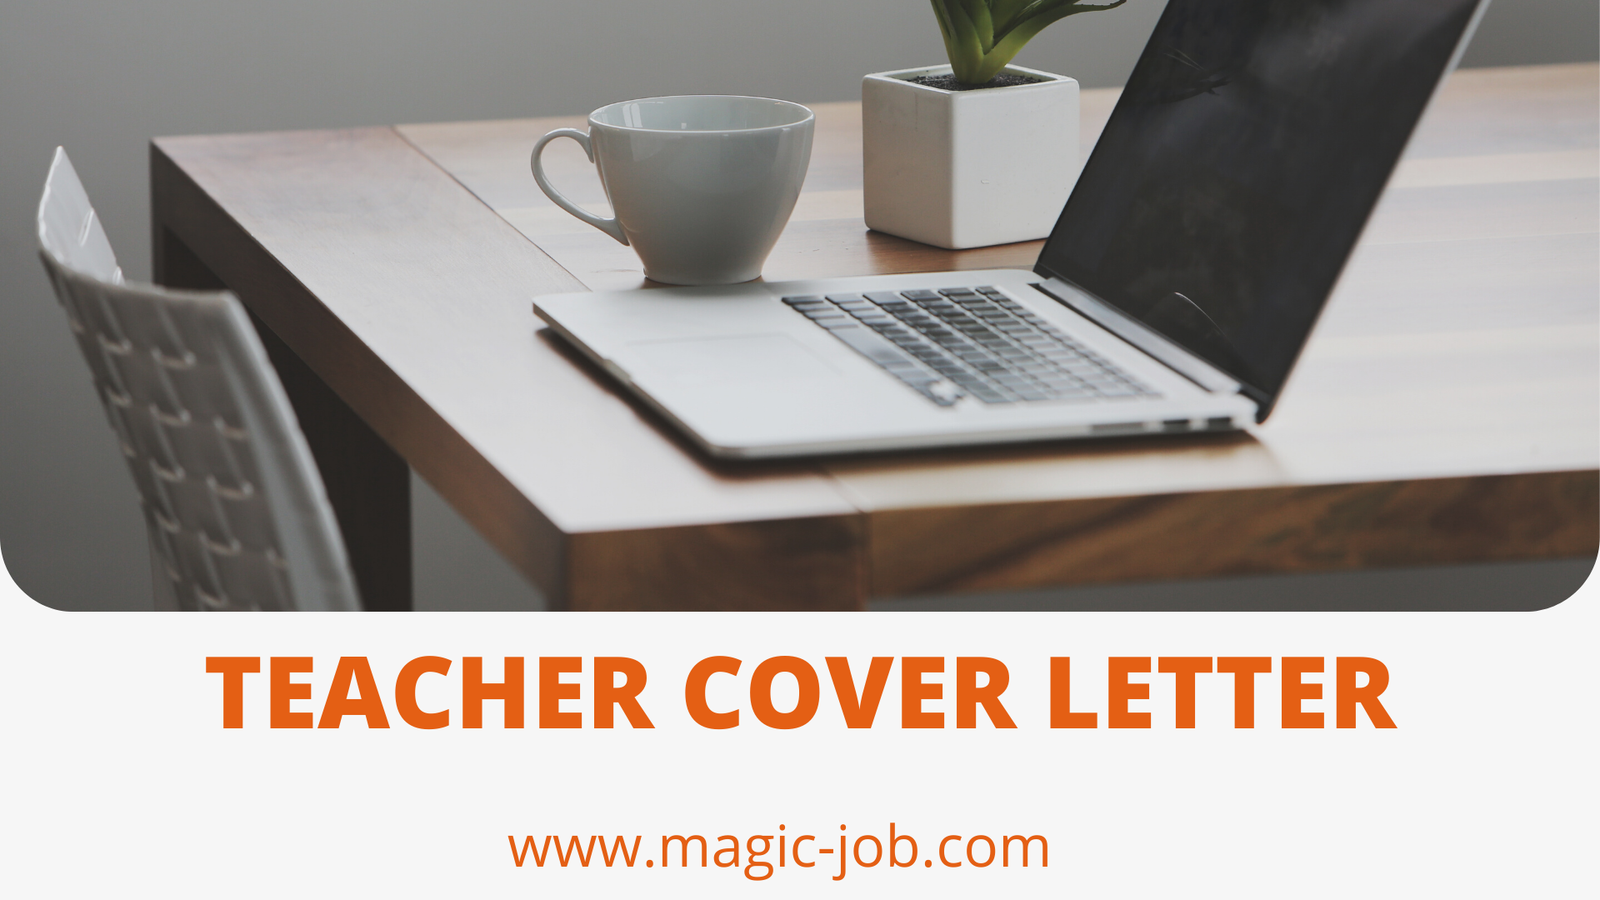 Cover letters for teachers - An influential cover letter hidden information. image